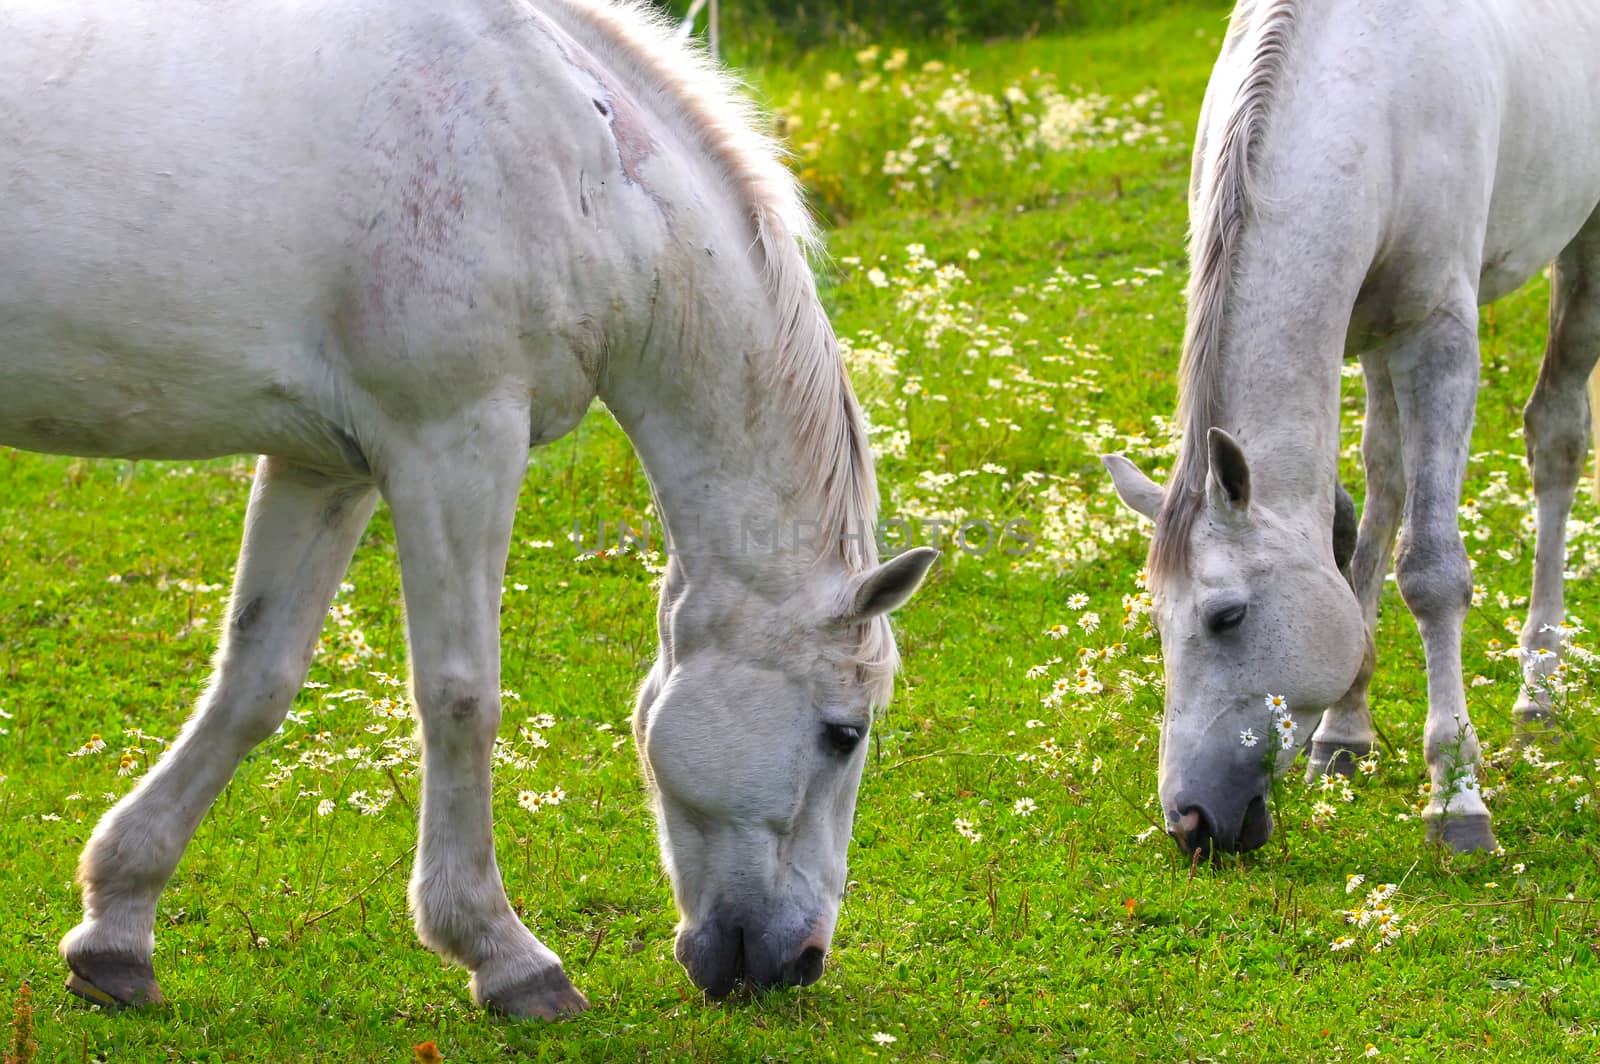 Two white horses eating fresh grass together on a beautiful green field filled with white flowers. Closeup of two horses with heads and front legs visible.